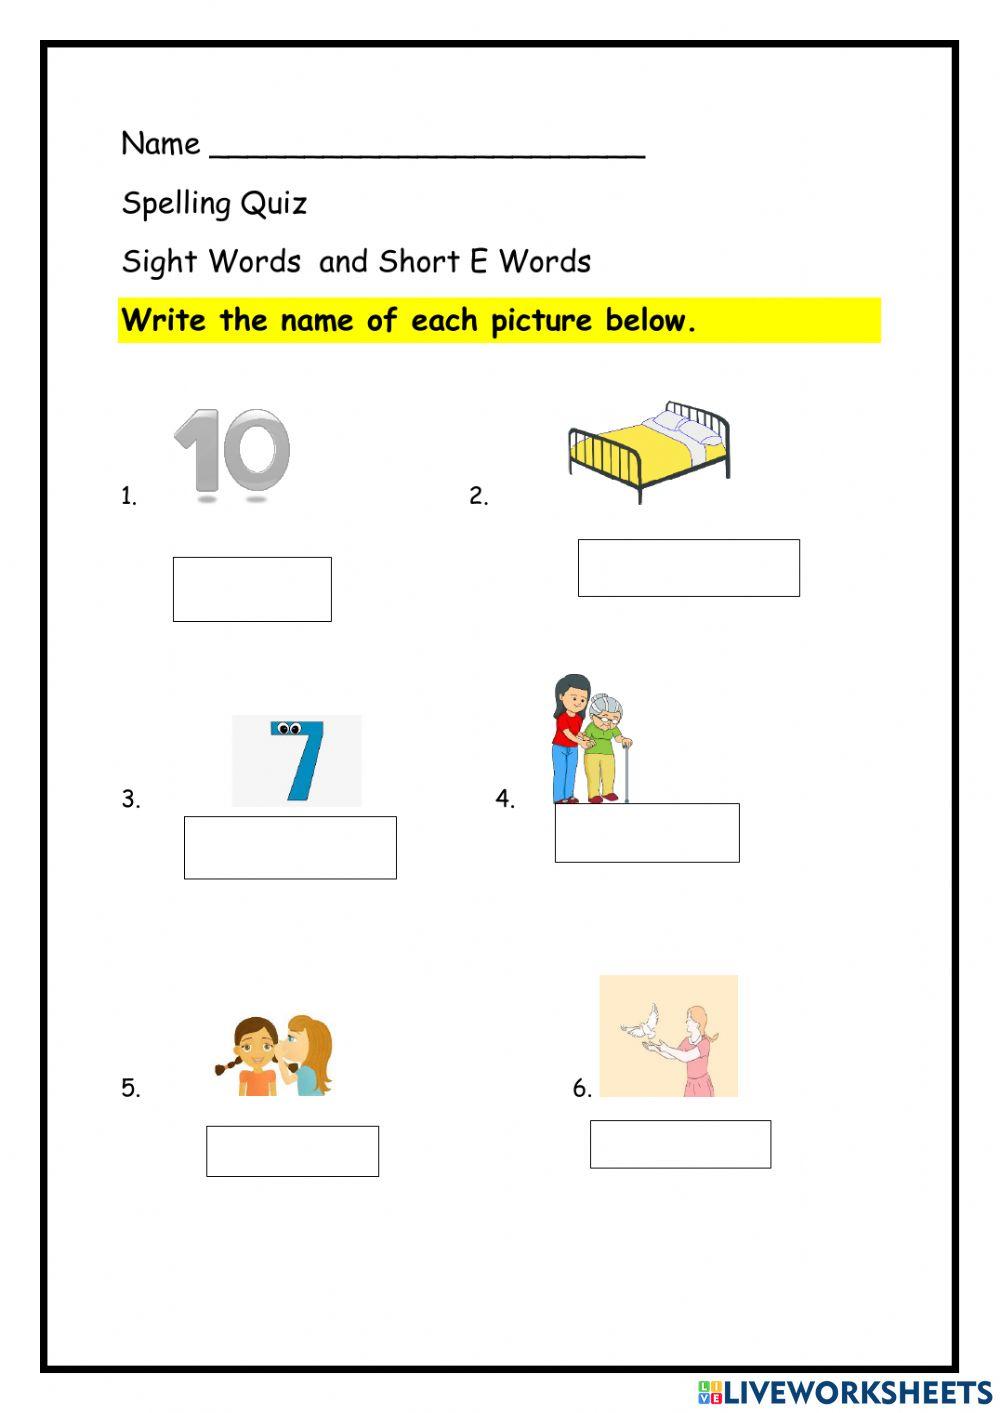 Week 8 Sight Words and Short E